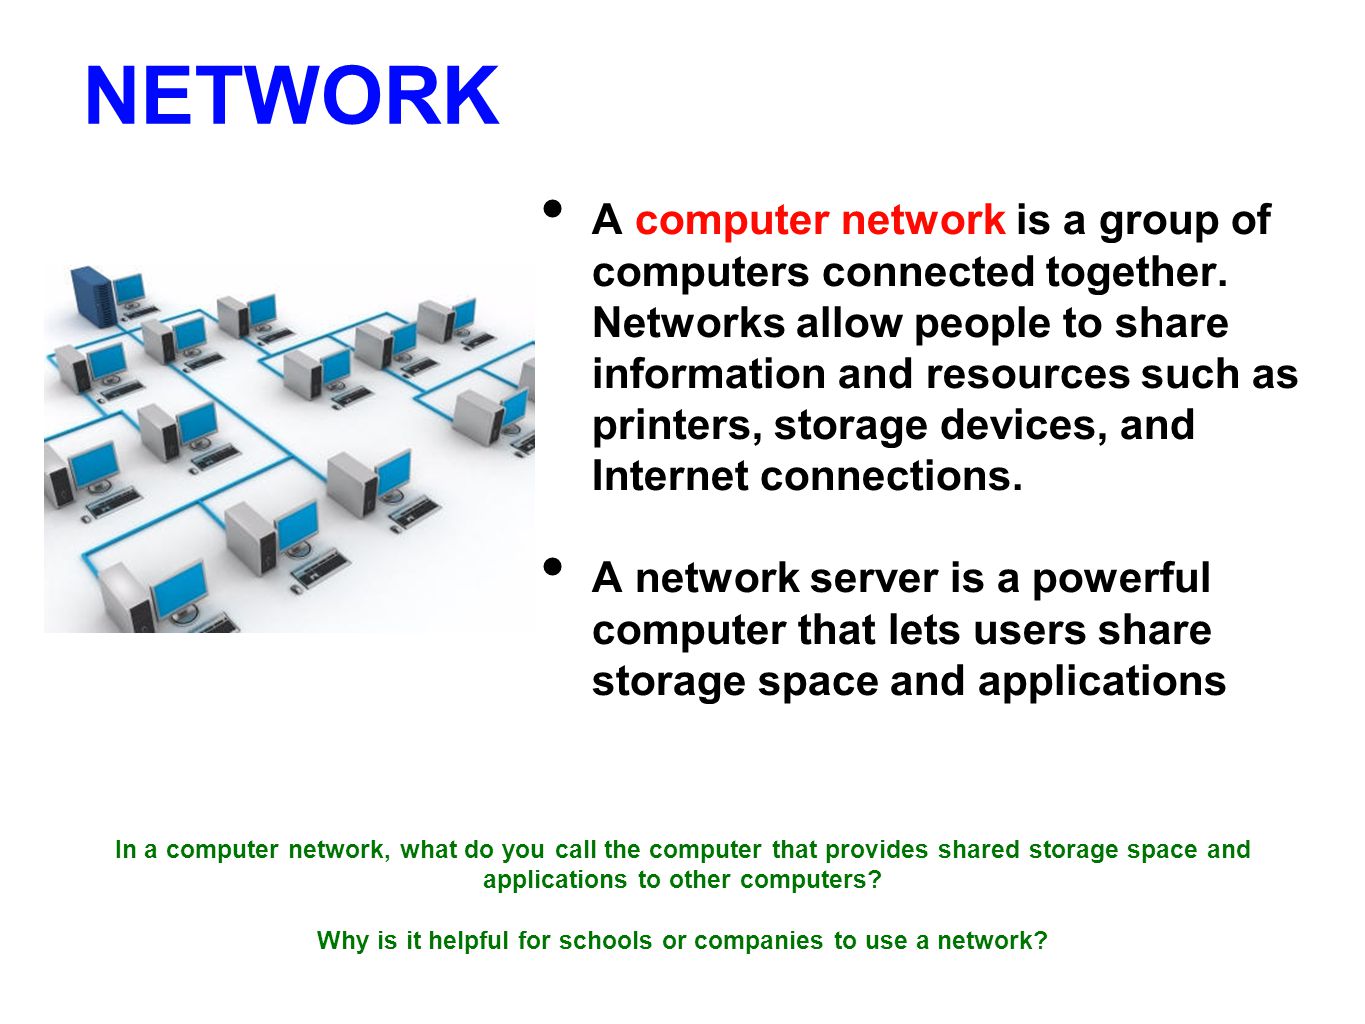 Why is it helpful for schools or companies to use a network